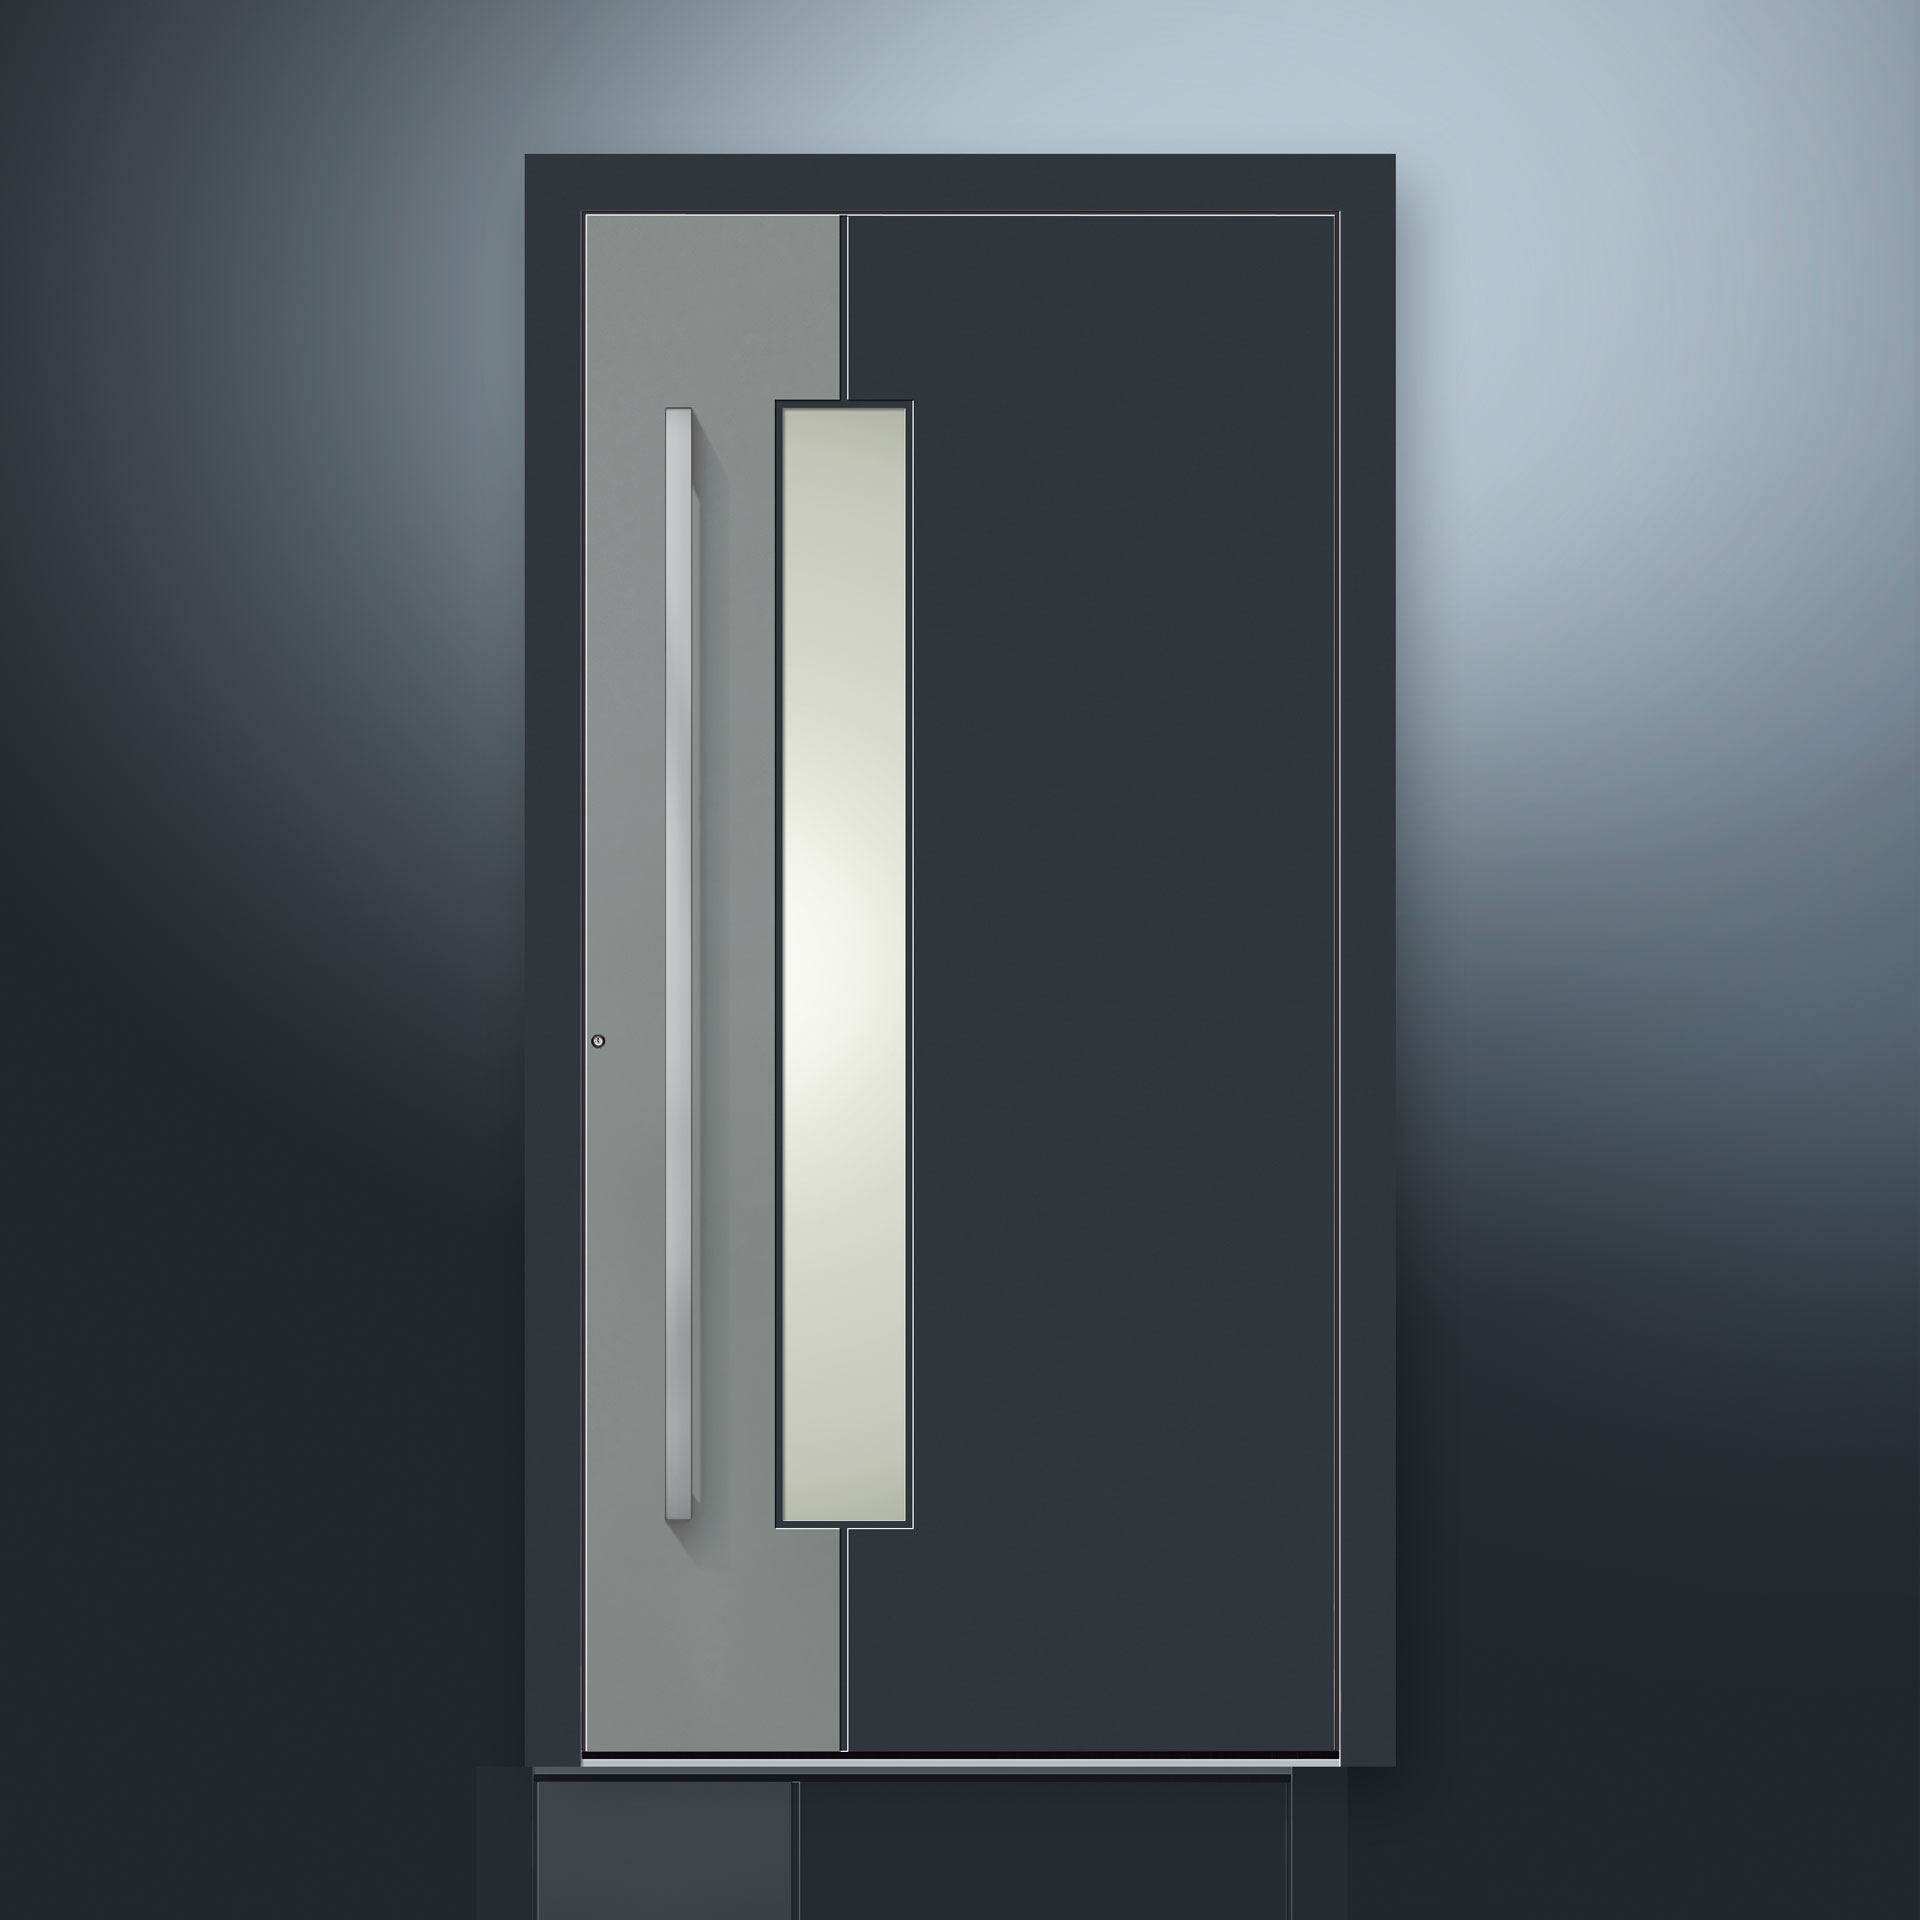 GUTMANN's ALLIGNO wood aluminium door system is in a choice of nine modern standard models available. Because it is made of aluminium this front door leave is weather-resistant, durable and maintenance friendly.